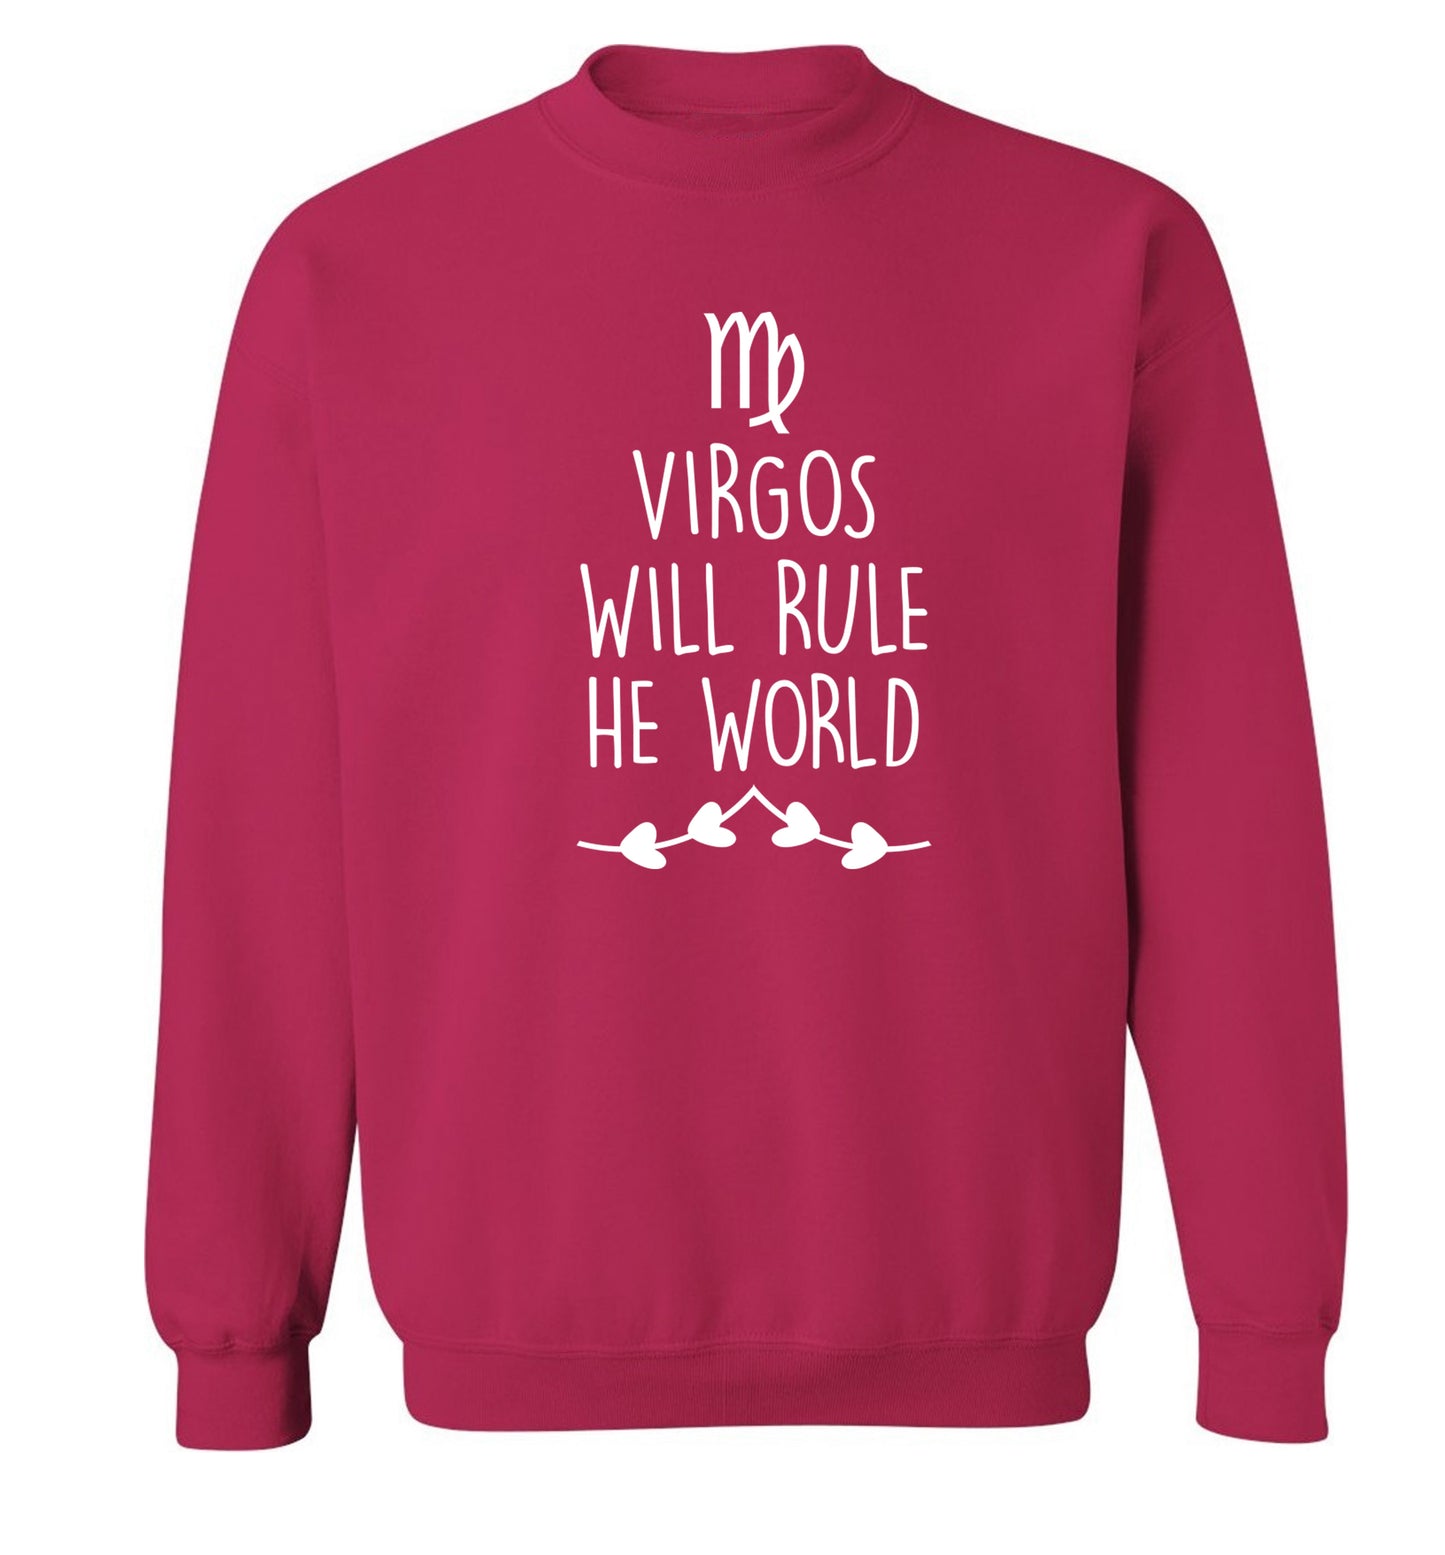 Virgos will rule the world Adult's unisex pink Sweater 2XL